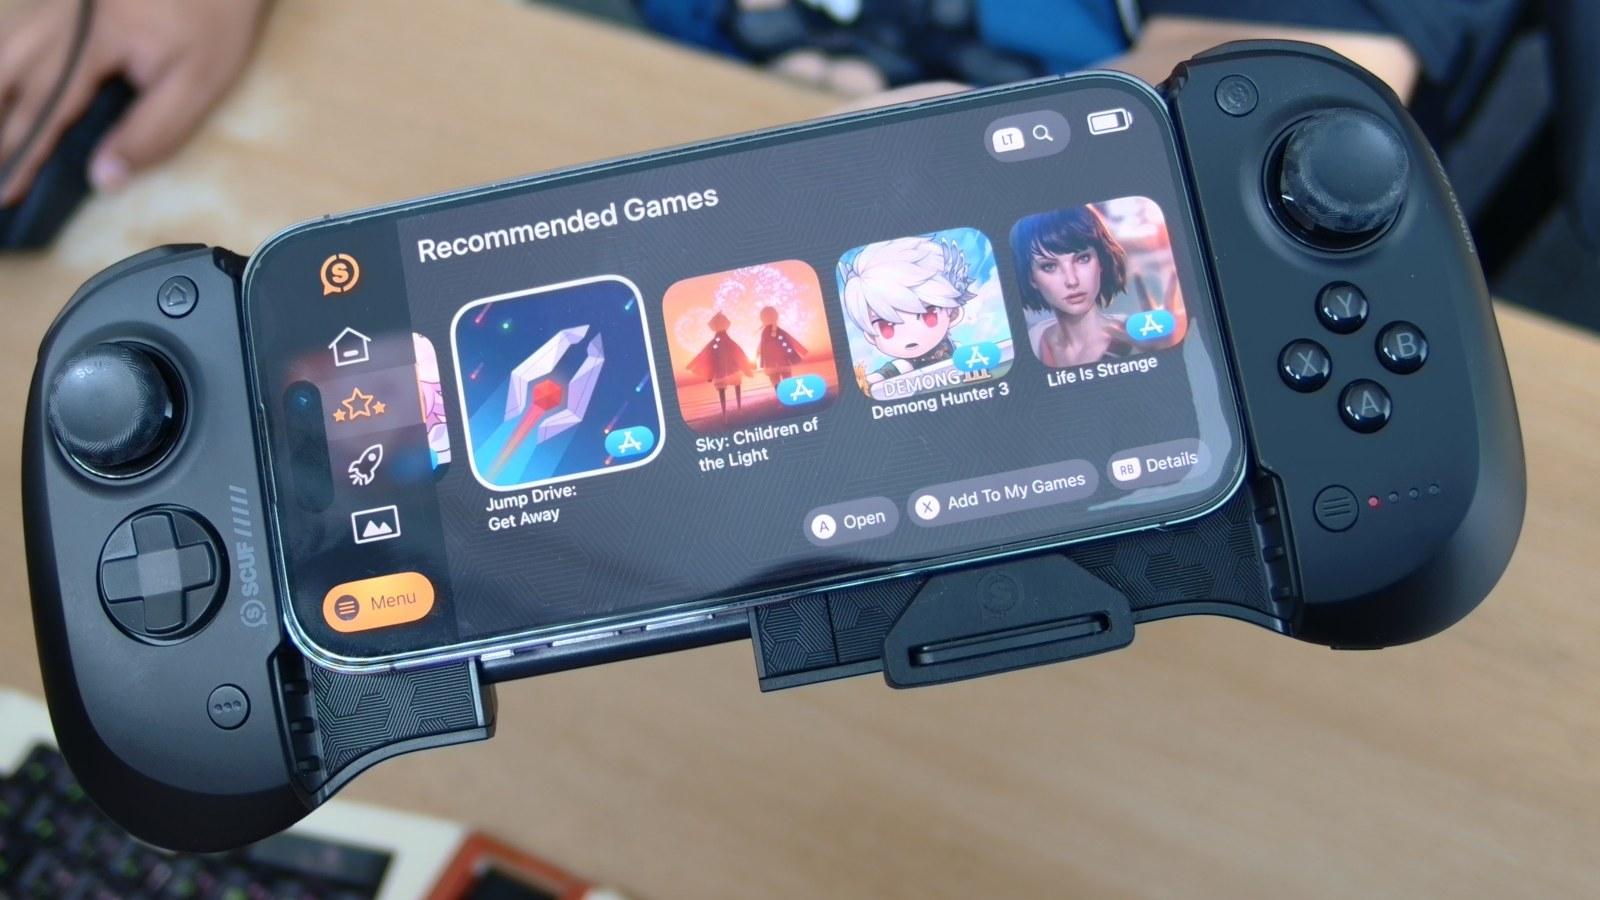 Scuf Nomad close up with games displayed on it on iPhone